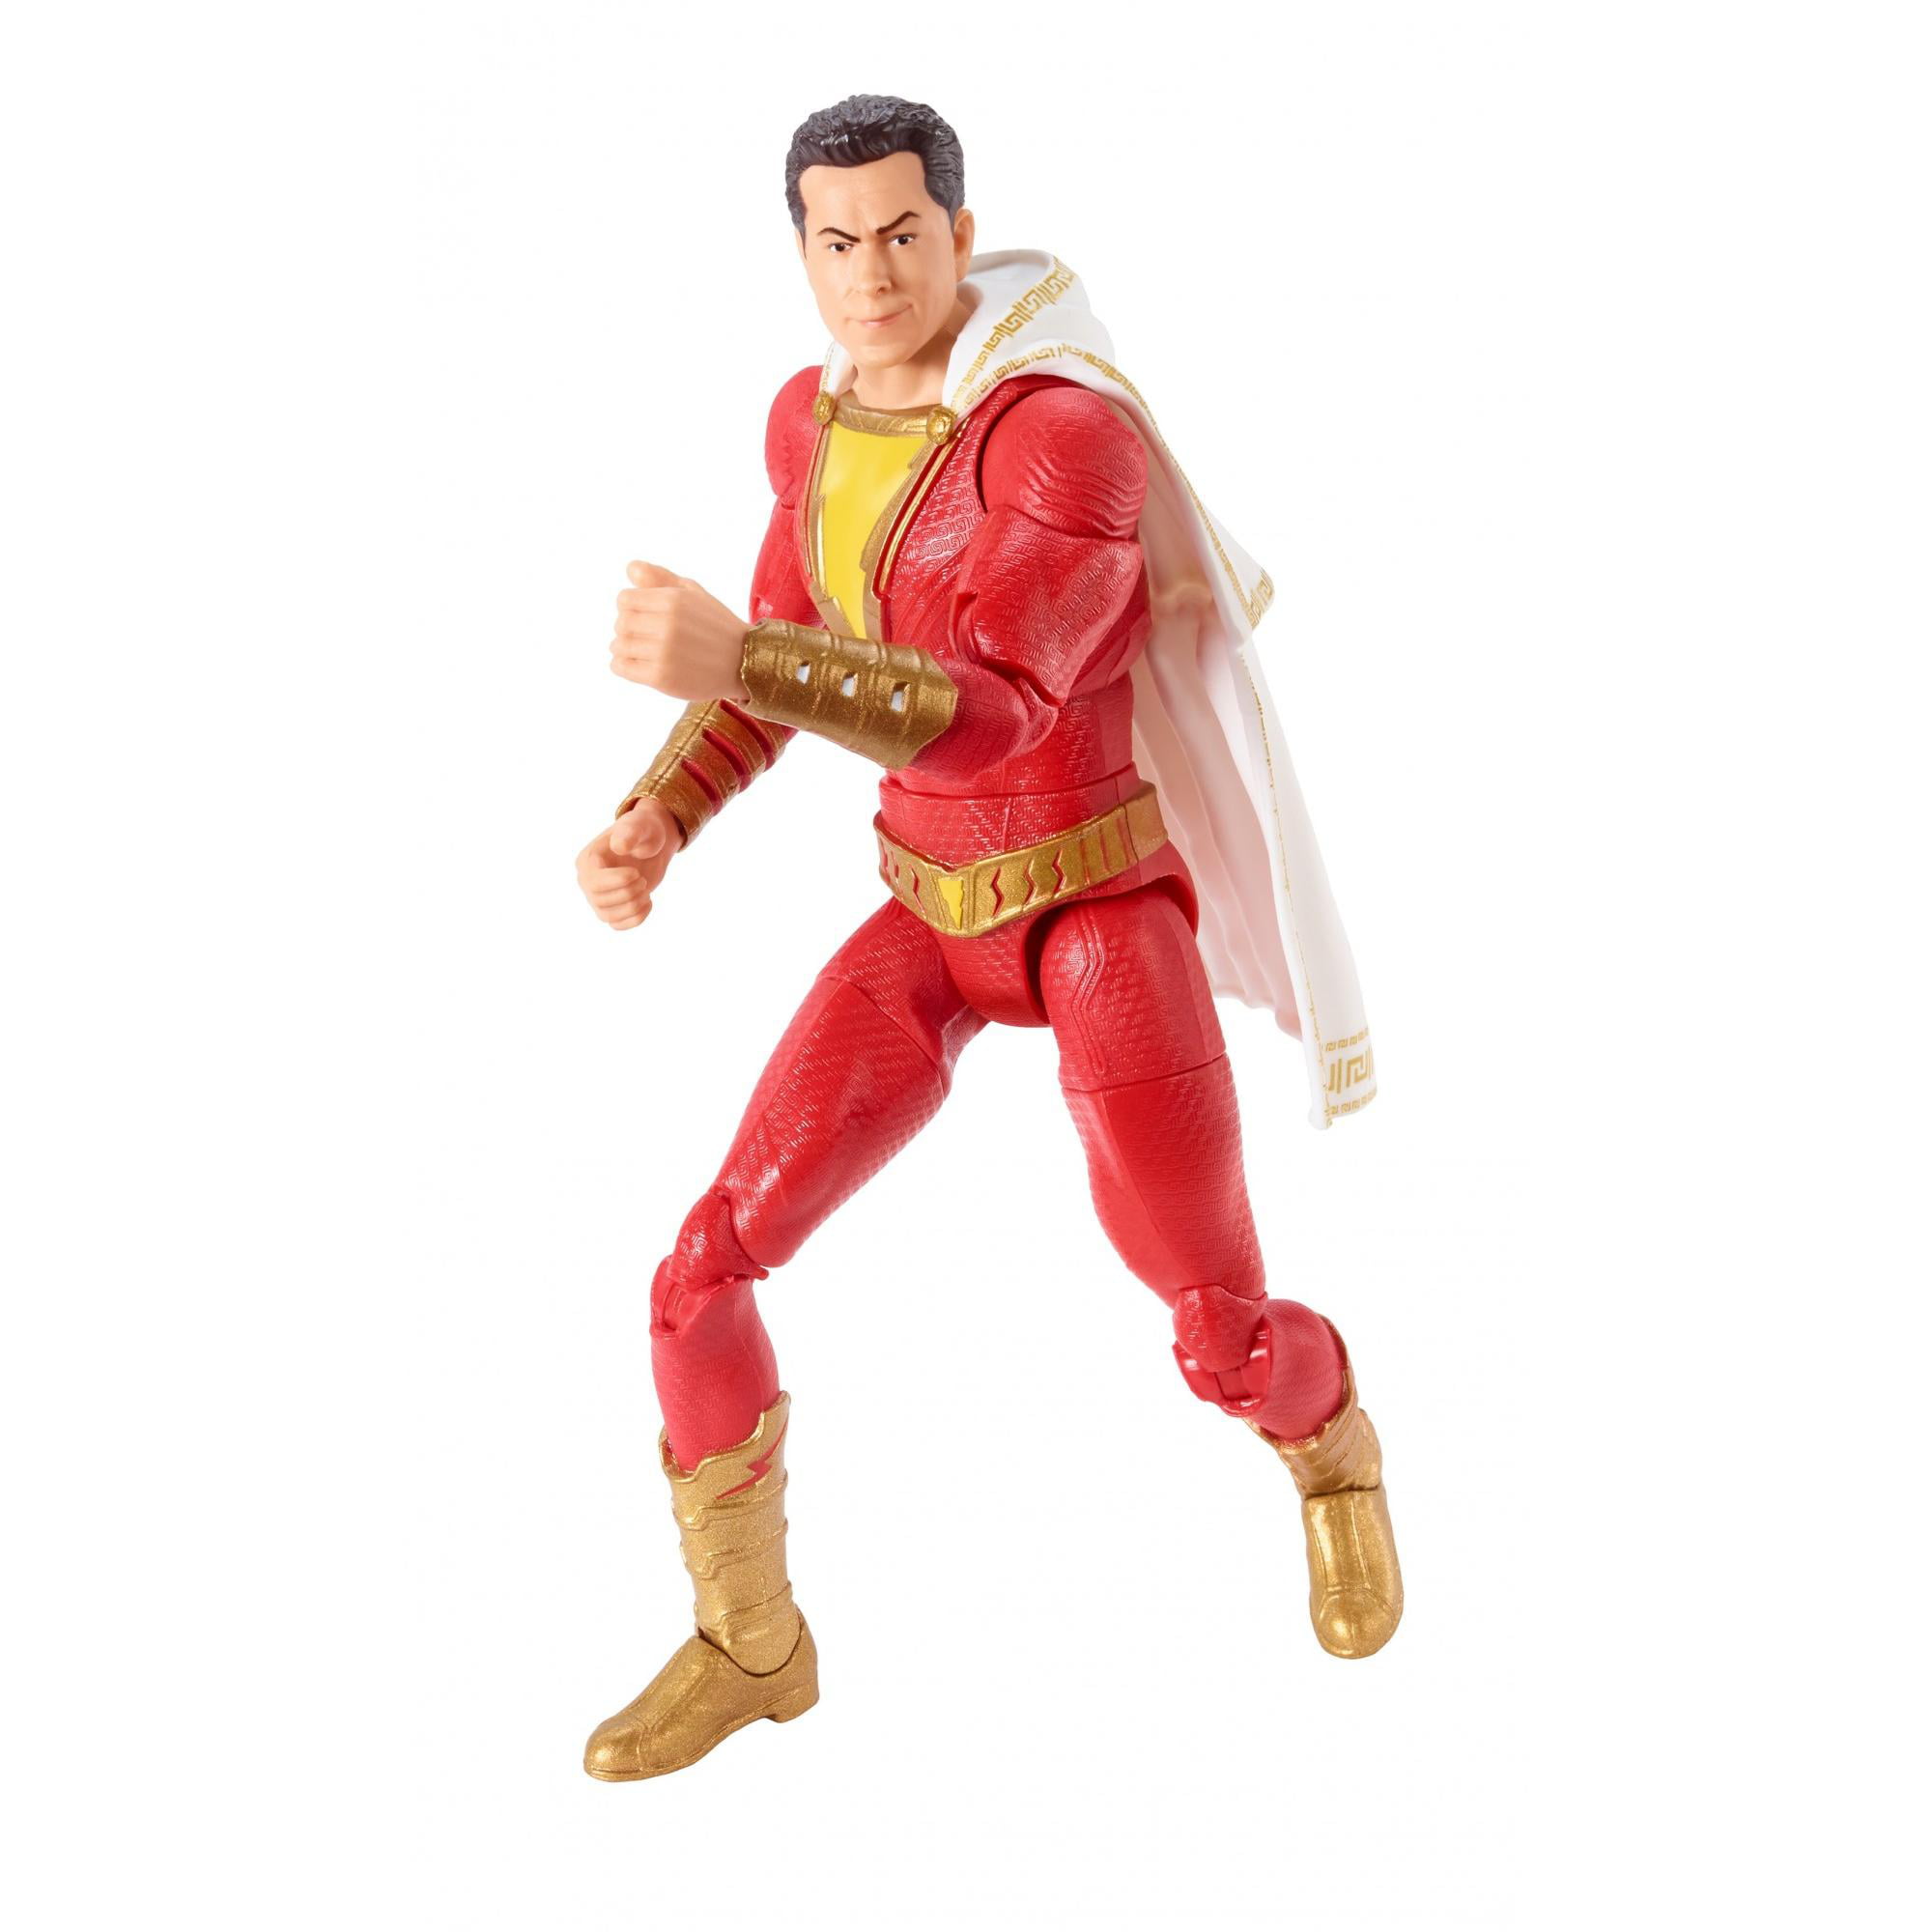 Shazam DC Direct Comics Multiverse 6 inch Movie Action Figure Power Kids Toy New 